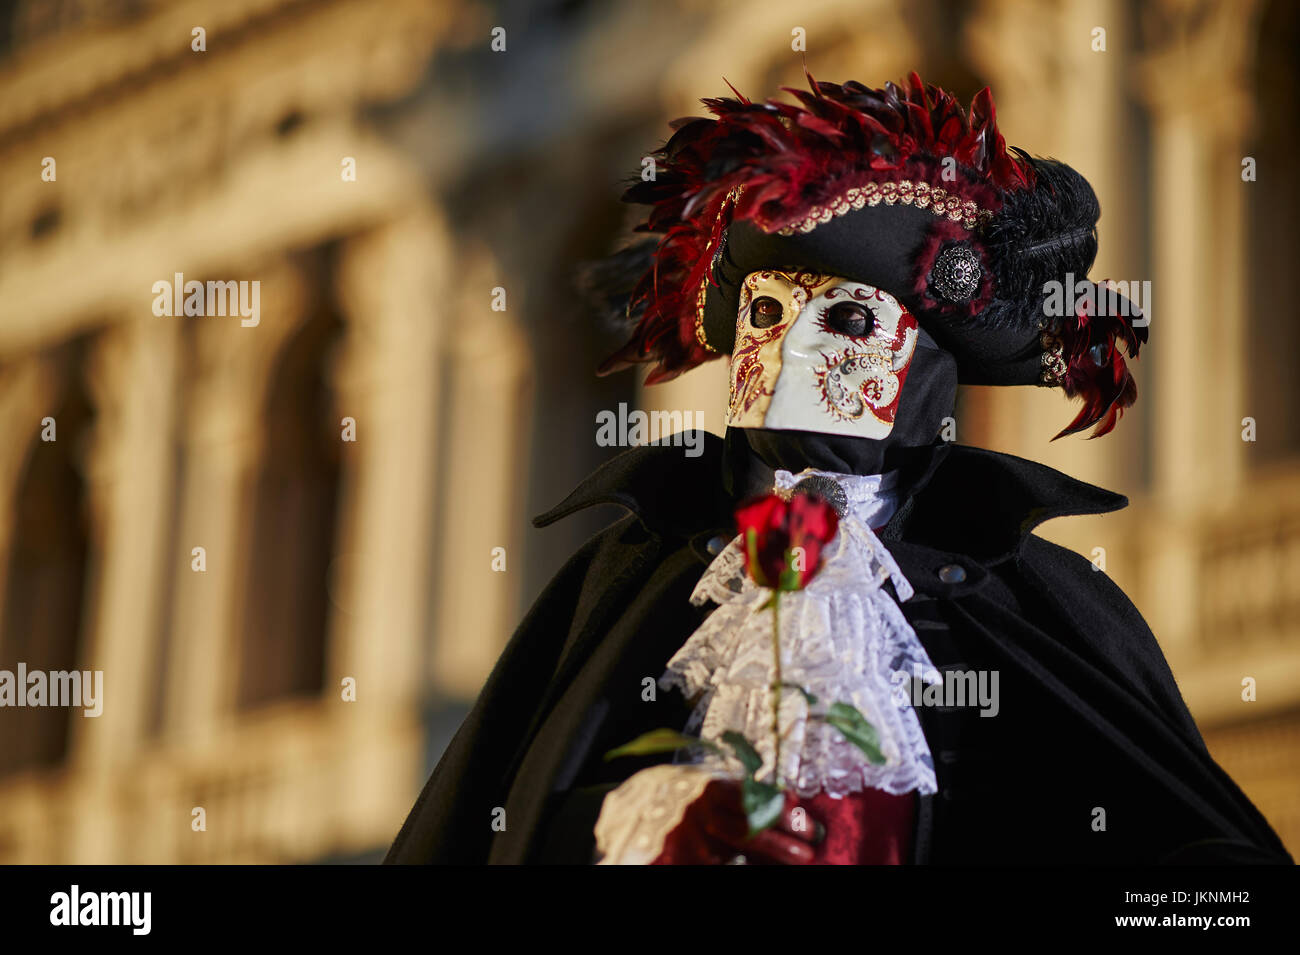 Bauta Mask and hat with red feathersin Carnival of Venice Stock Photo